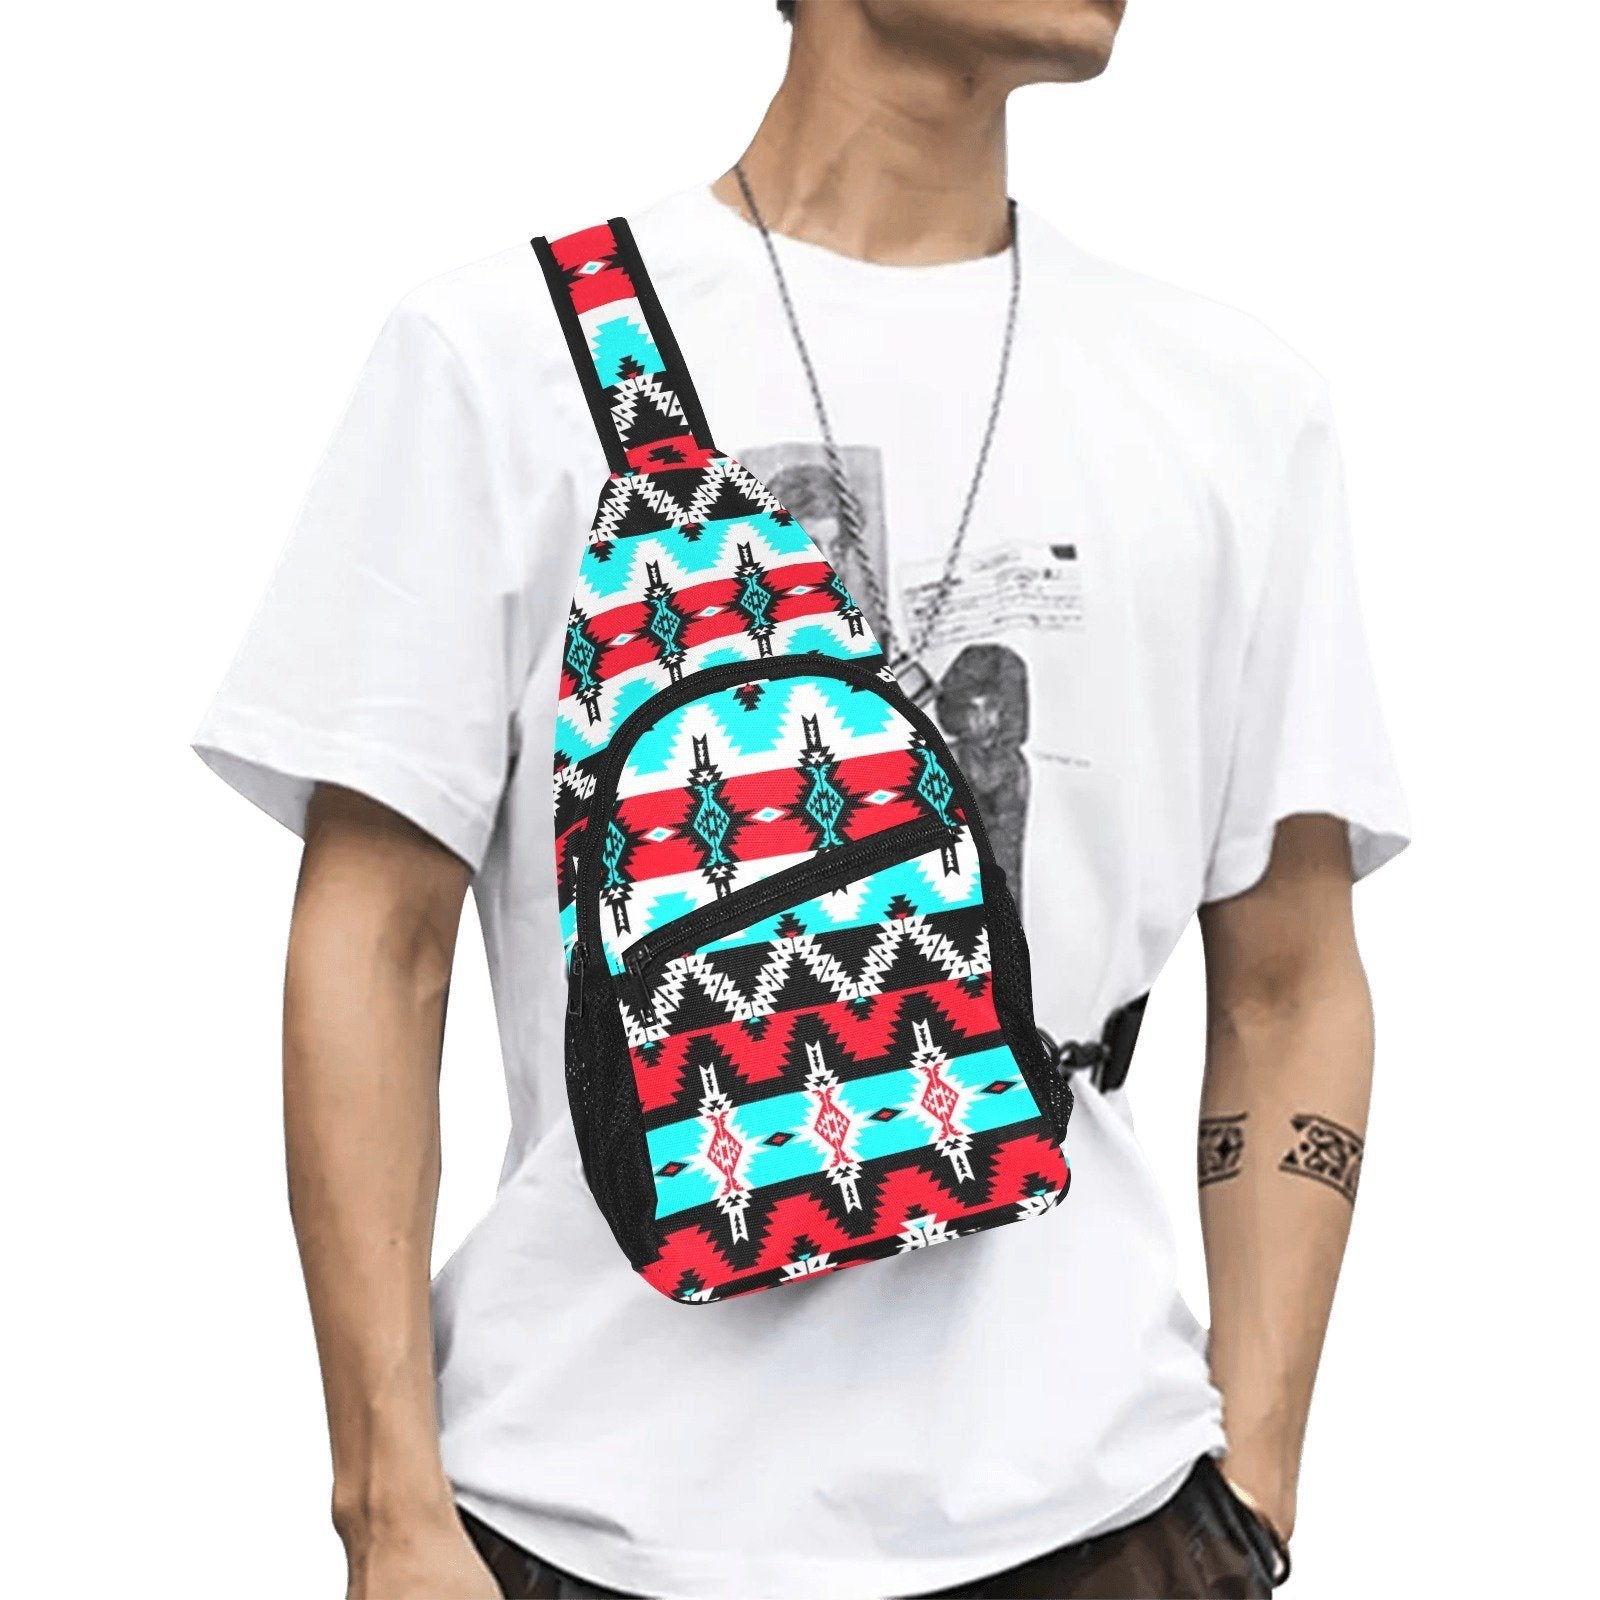 Two Spirit Dance All Over Print Chest Bag (Model 1719) All Over Print Chest Bag (1719) e-joyer 